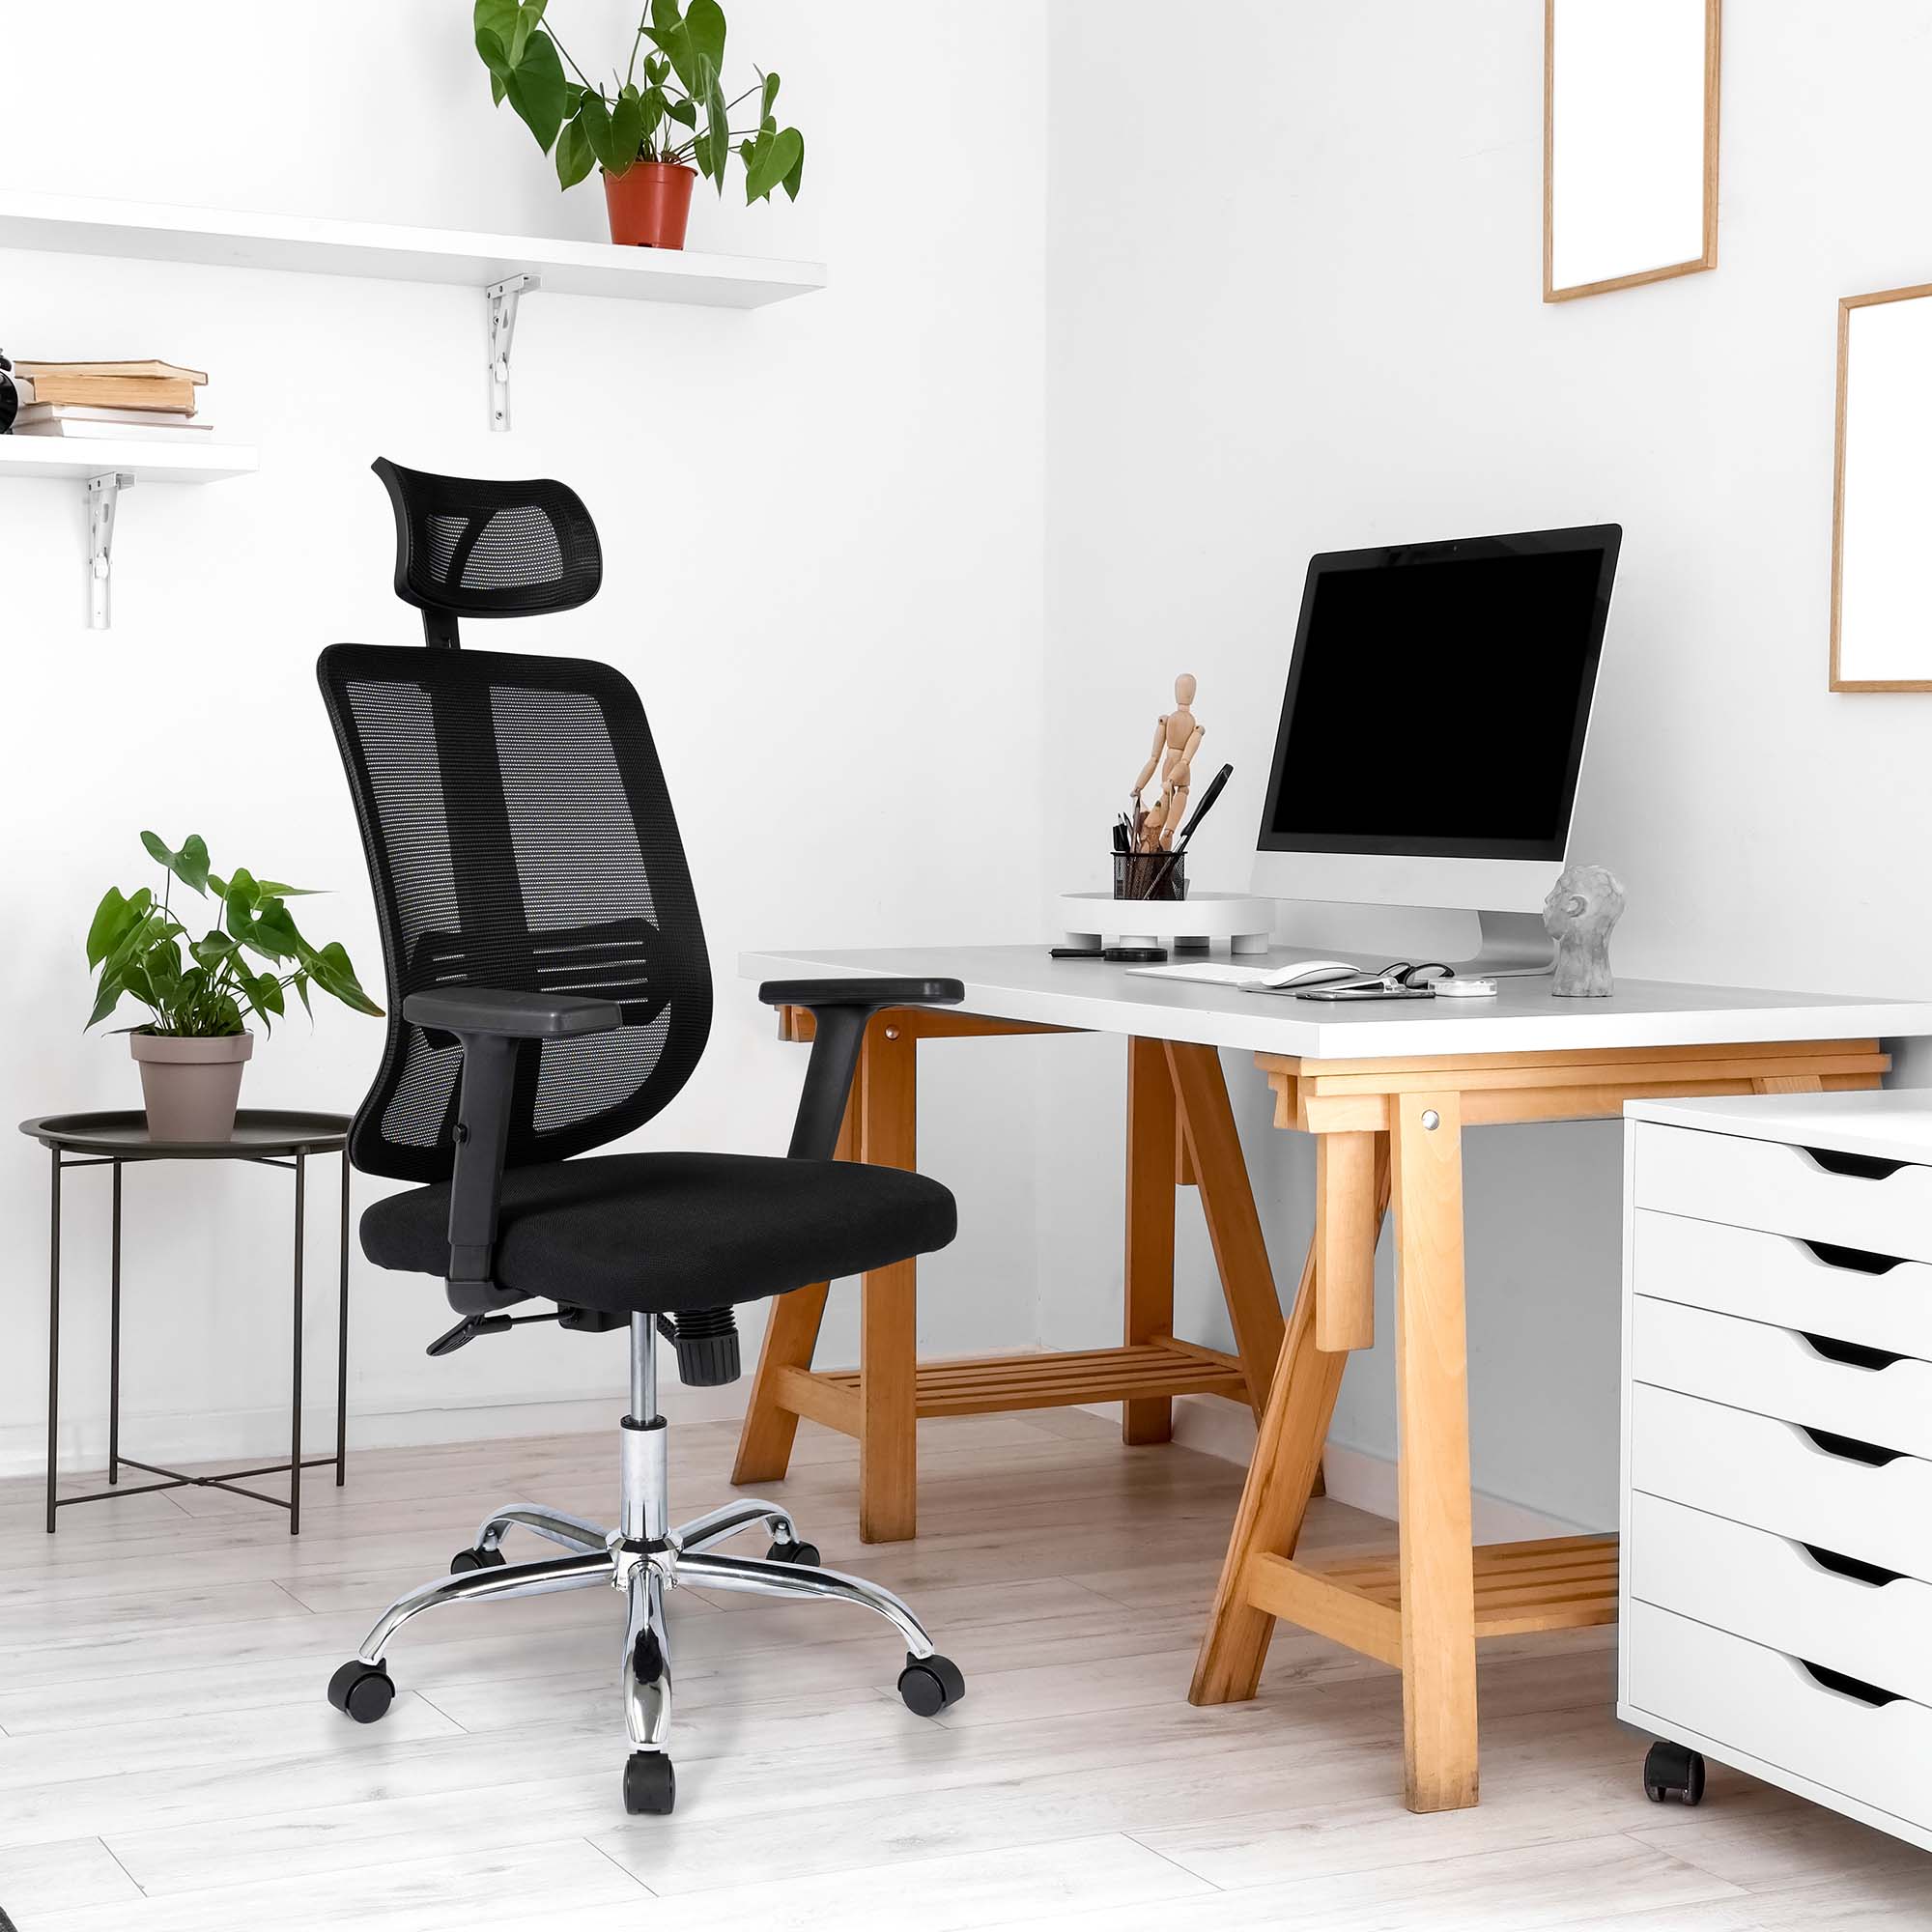 Ergodu Office Chair with Adjustable Armrests mood photo